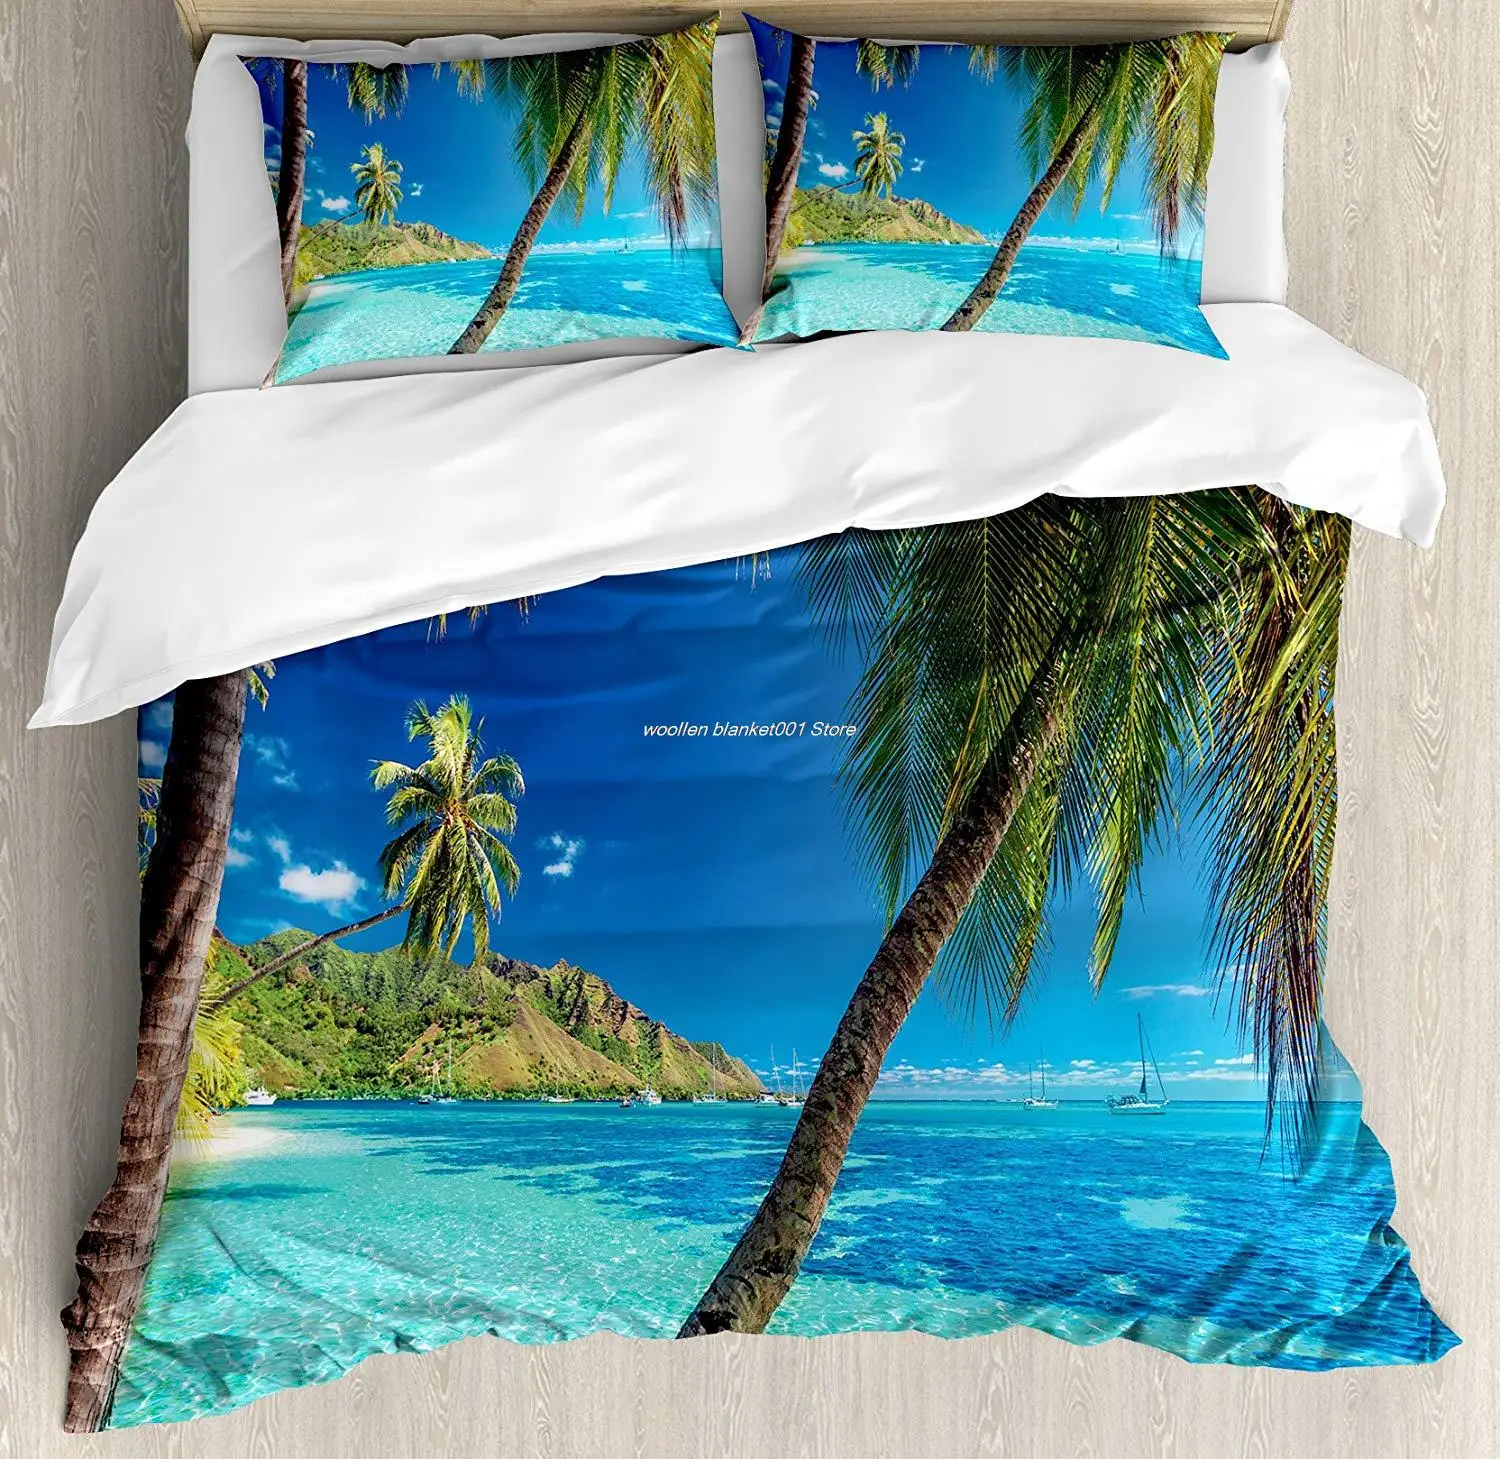 

Ocean Duvet Cover Set Image of a Tropical Island with The Palm Trees and Clear Sea Beach Theme Print Decorative 3 Piece Bedding